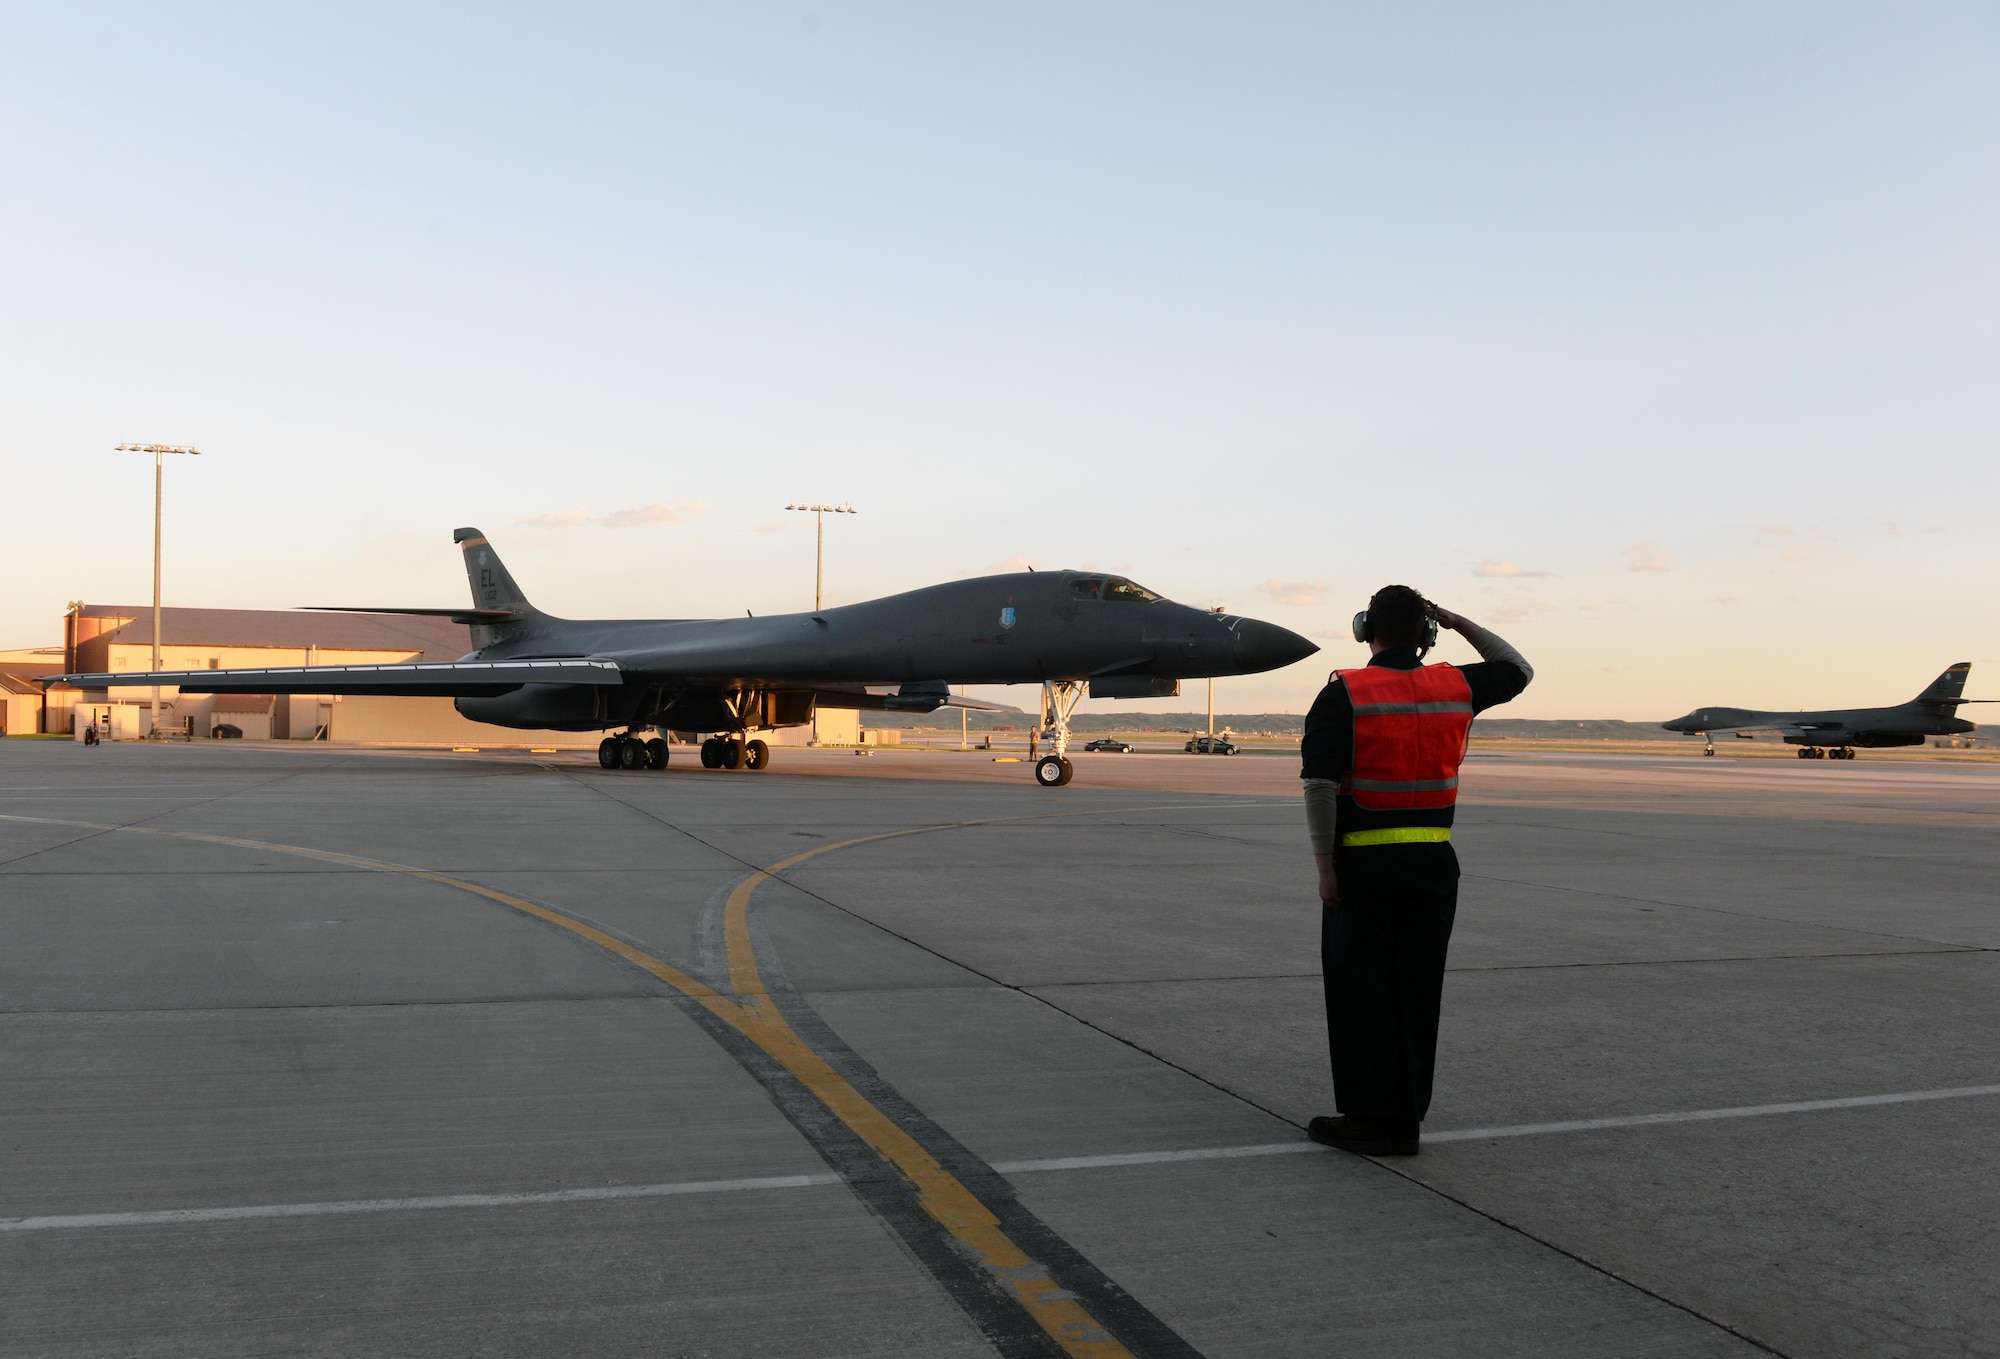 A maintainer salutes a B-1B Lancer assigned to the 28th Bomb Wing as it taxis to the runway to launch from Ellsworth Air Force Base, S.D., April 28, 2020. A pair of B-1s flew from the continental United States and conducted operations over the South China Sea as part of a joint U.S. Indo-Pacific Command and U.S. Strategic Command Bomber Task Force mission. (U.S. Air Force photo by Airman Quentin Marx)